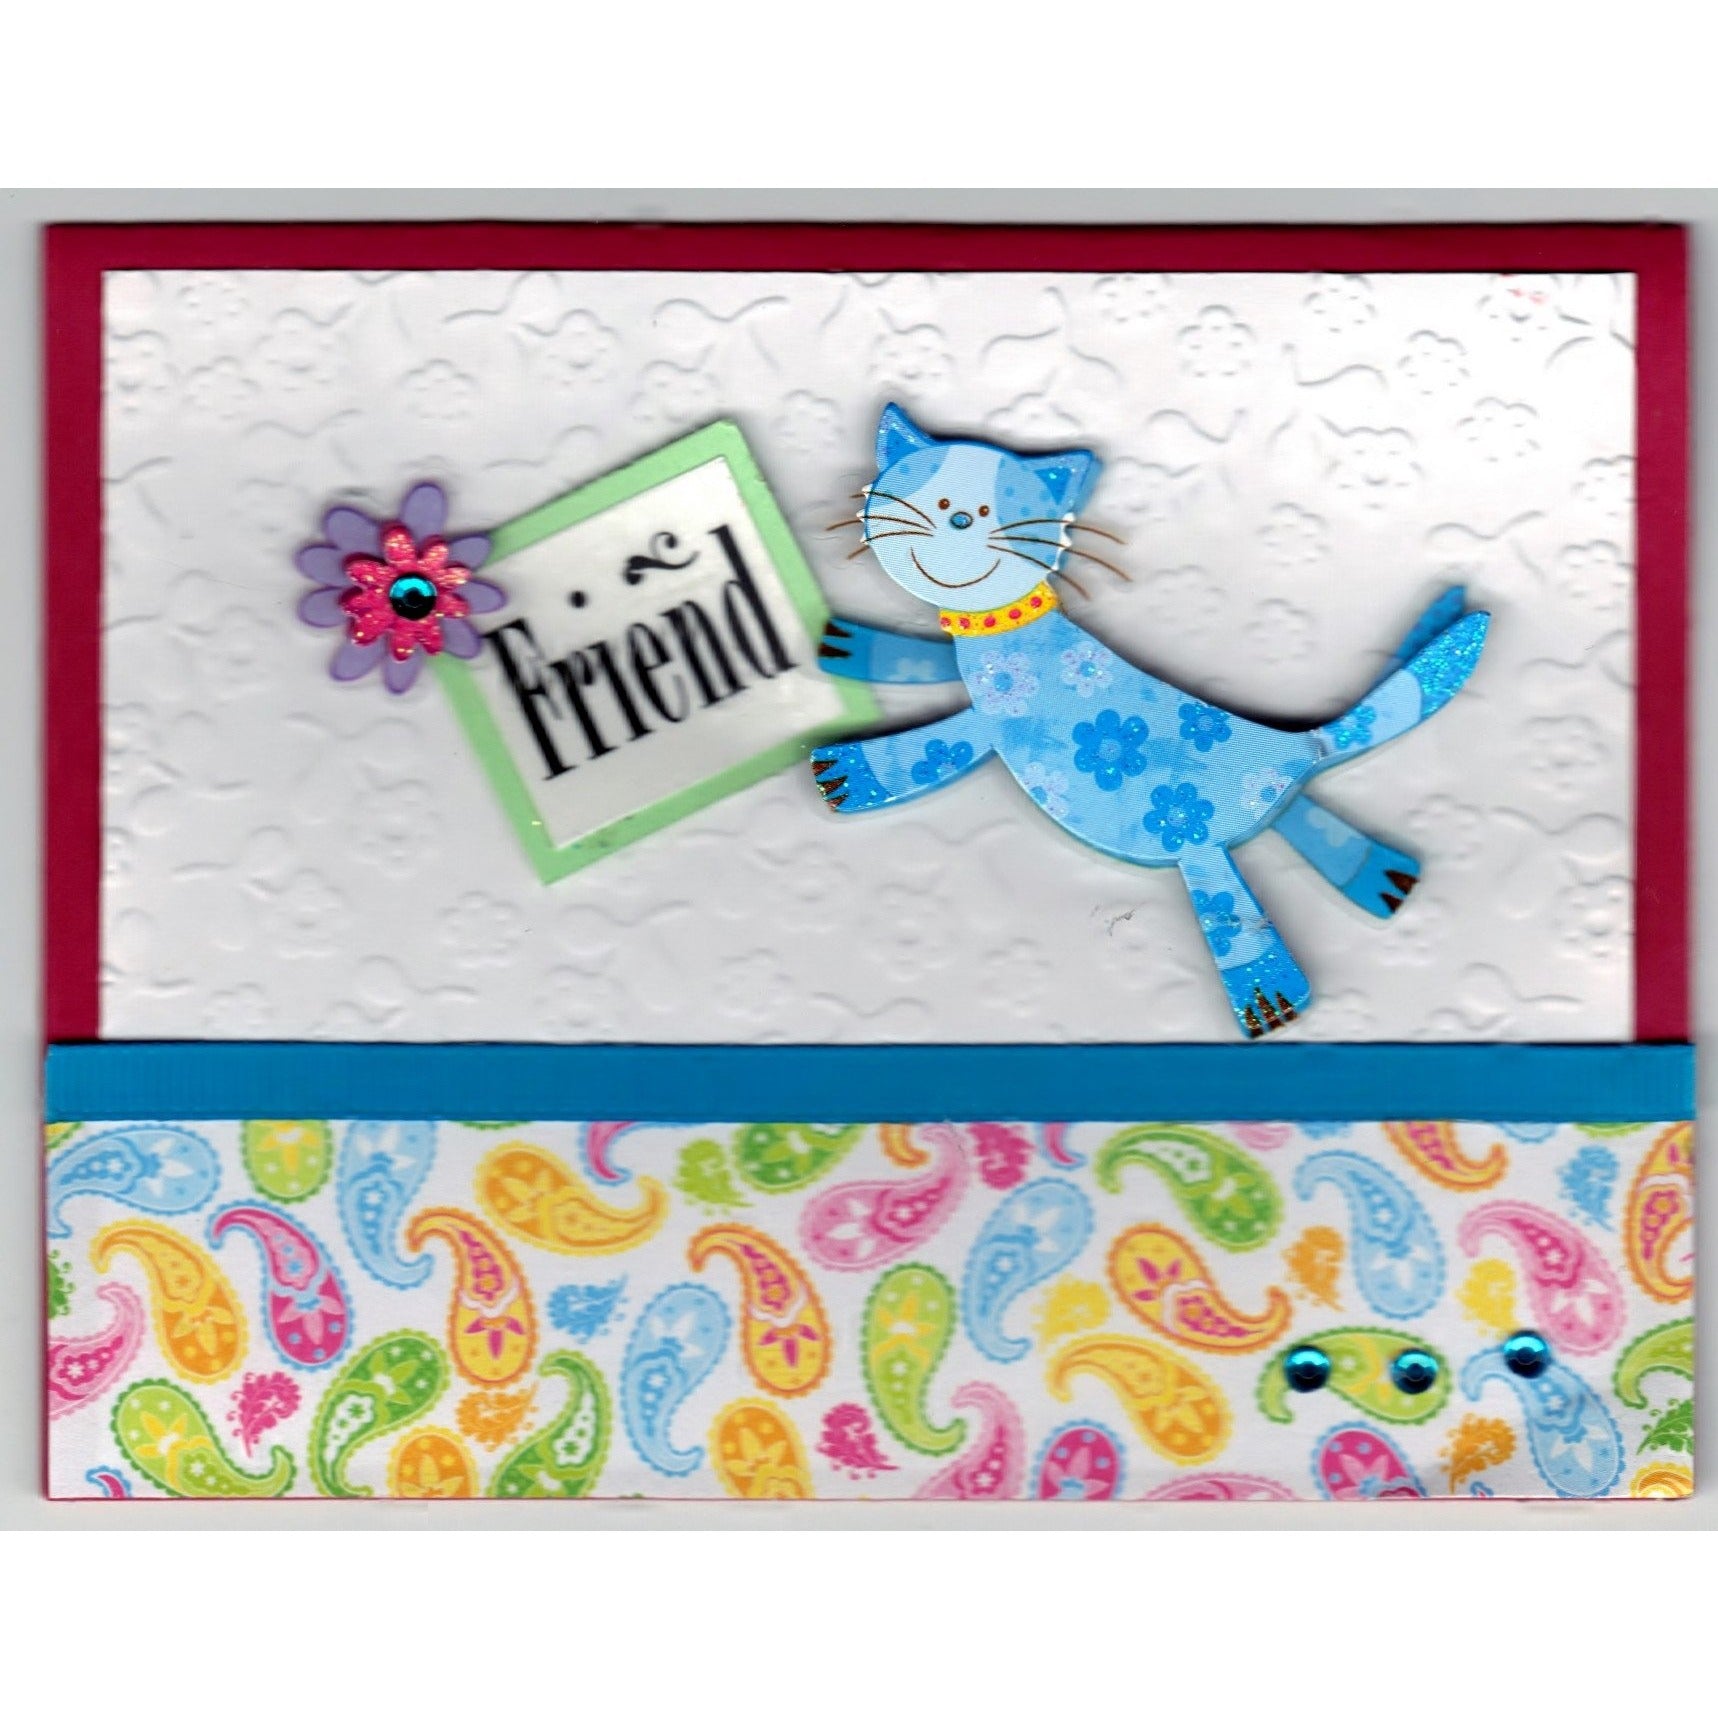 Happy Birthday Friend Handmade Good Greeting Supply Card - Cards And Other Paper Products - Made In U.S.A. - SharPharMade - 1